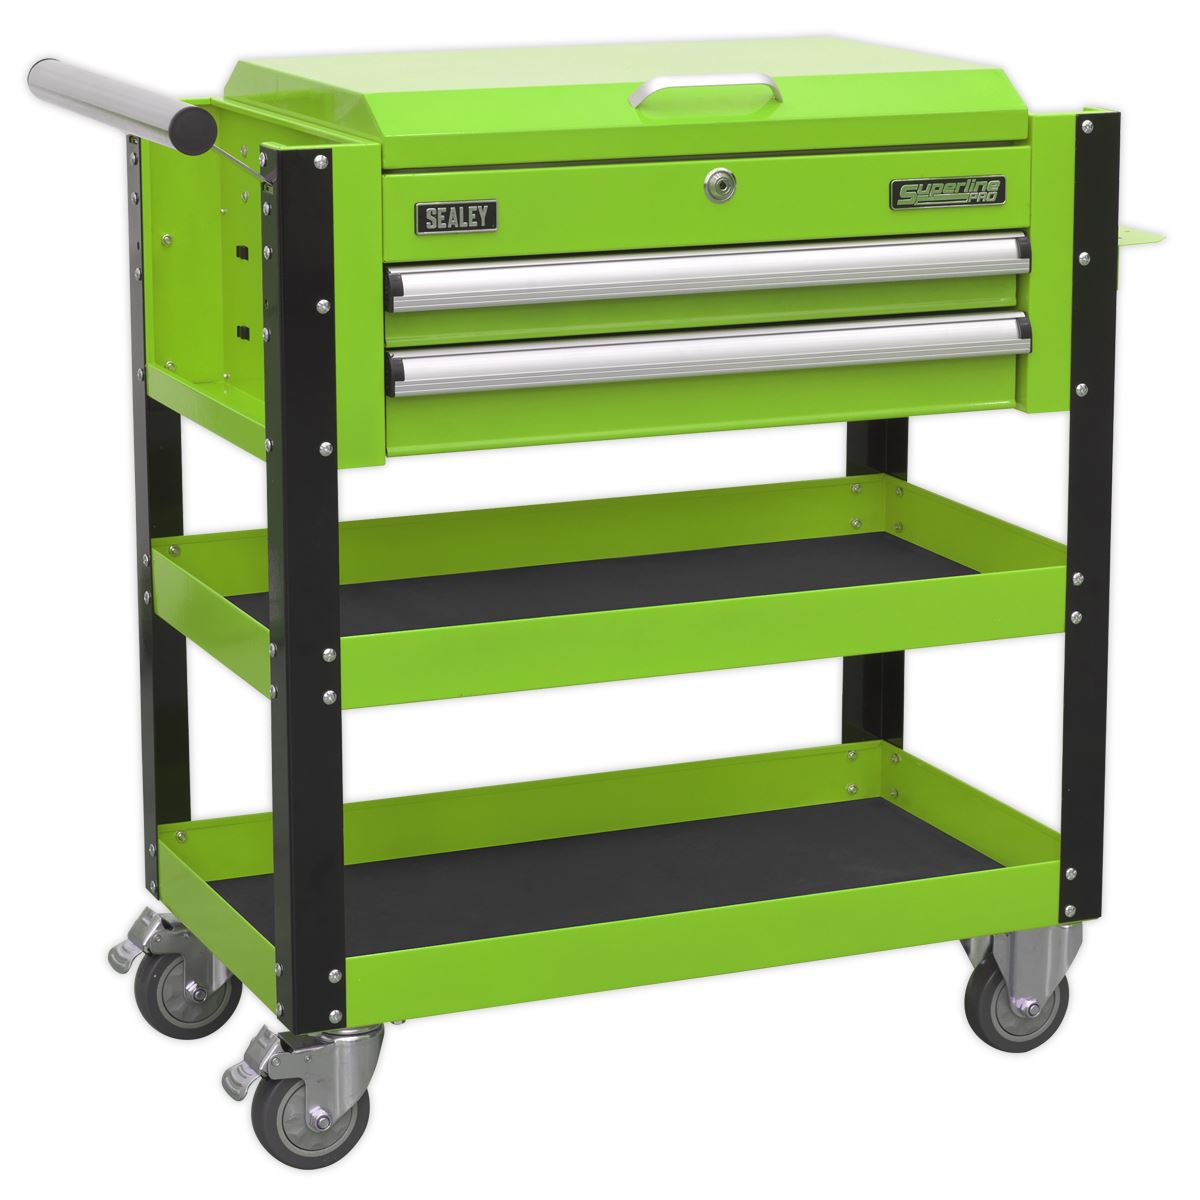 Sealey Superline Pro Heavy-Duty Mobile Tool & Parts Trolley 2 Drawers & Lockable Top - Green